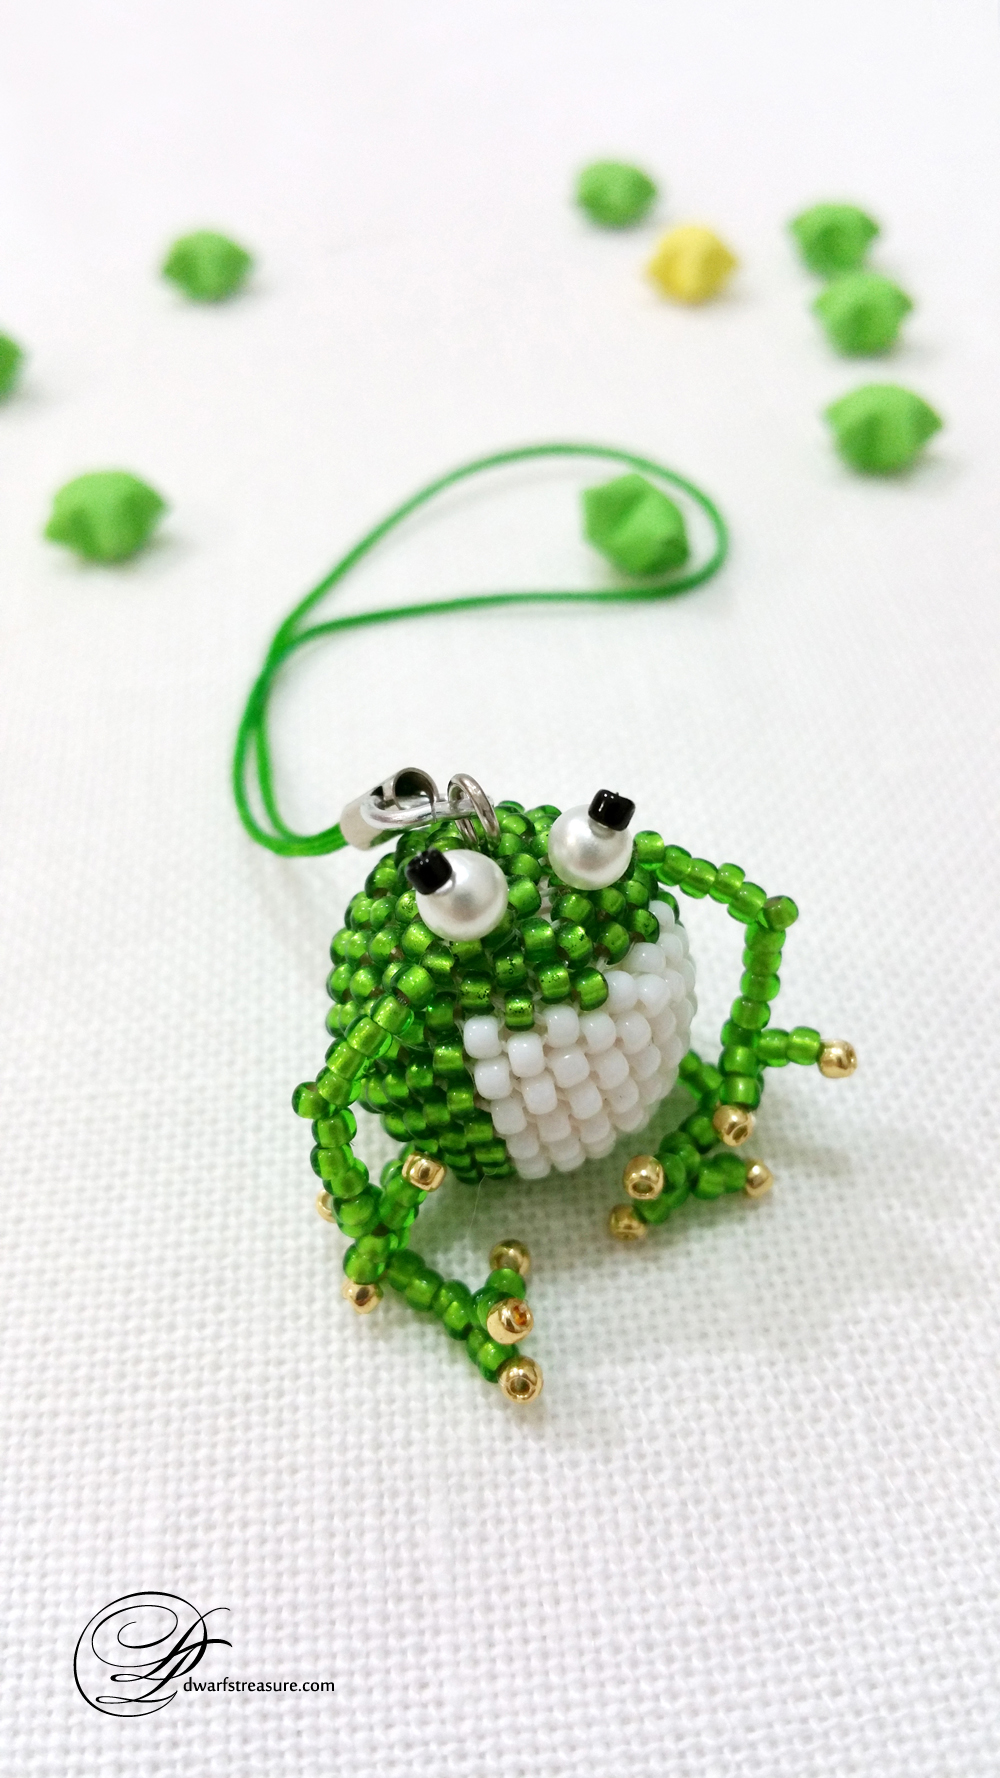 Cool beaded creature for charming personal stuff